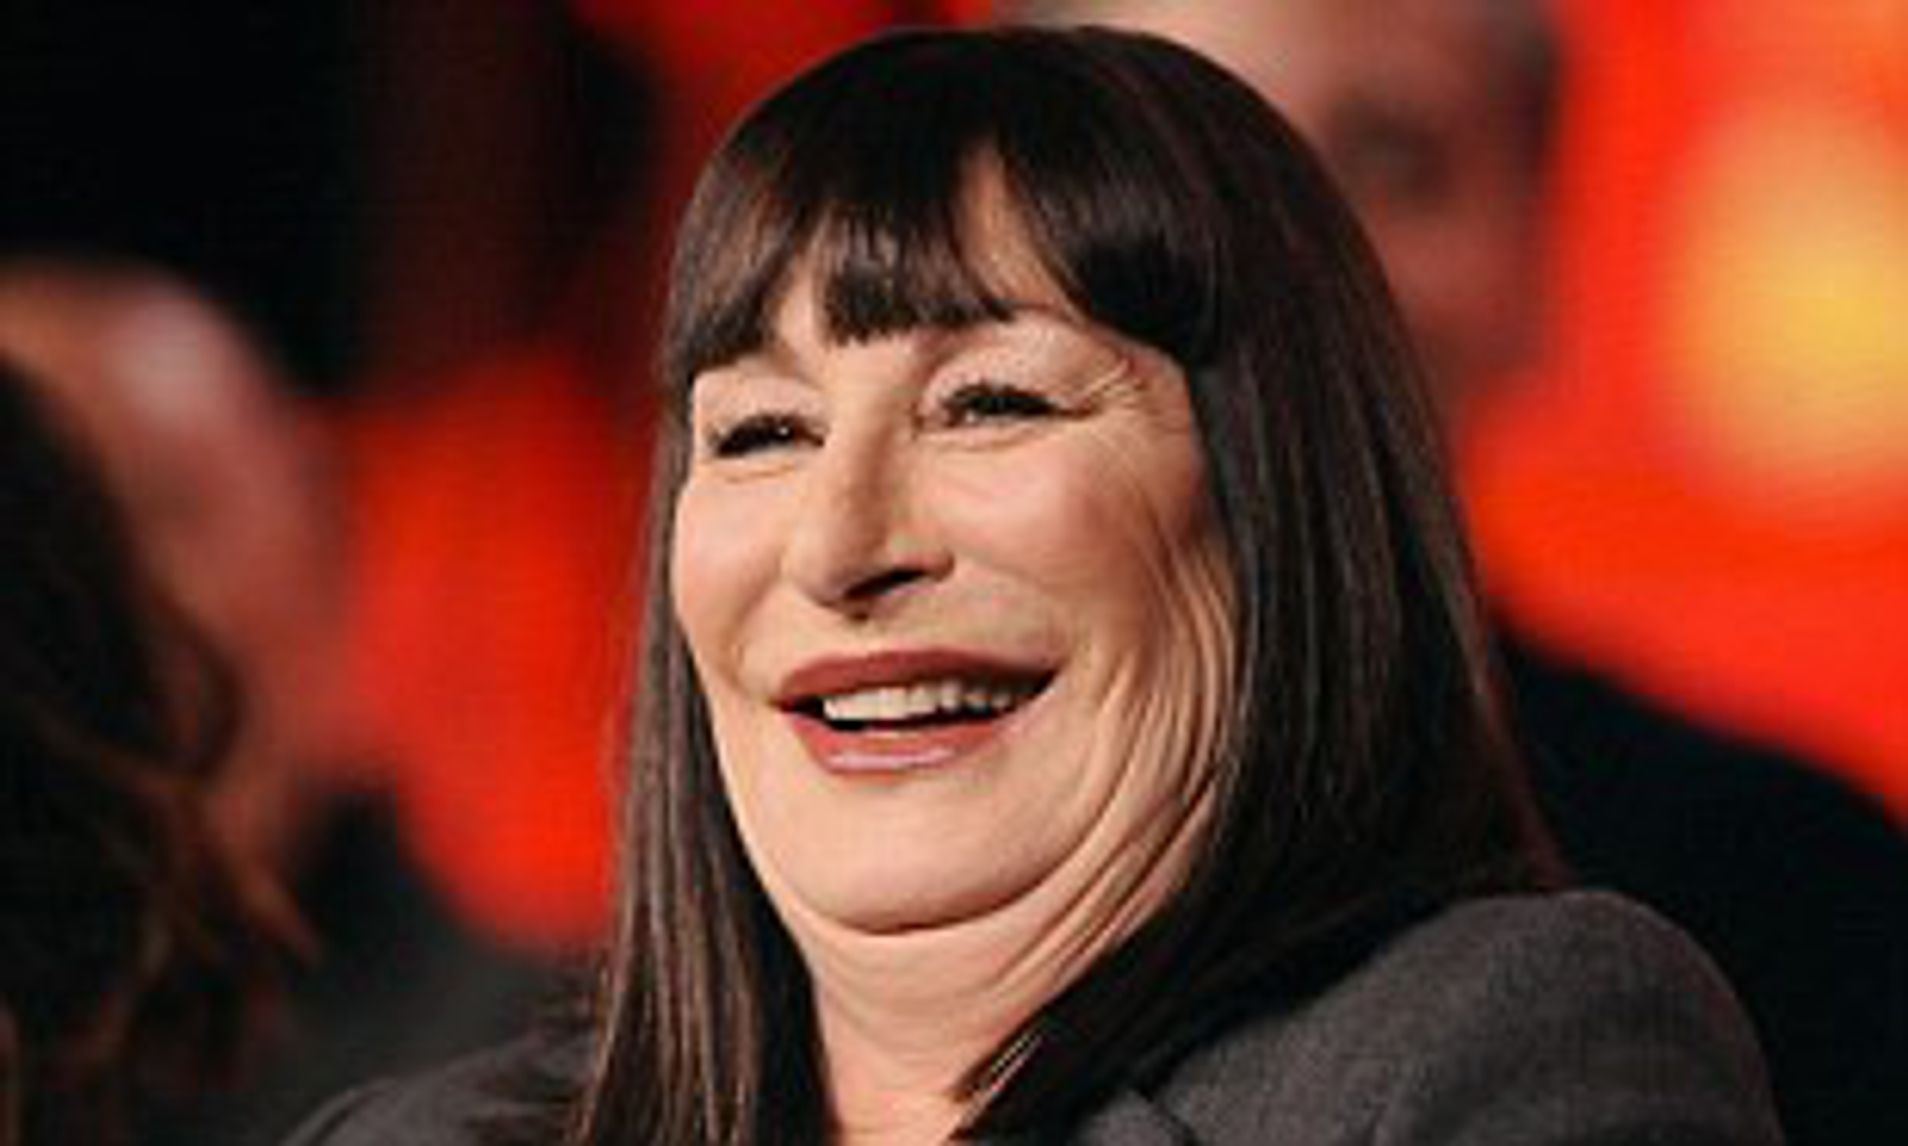 Anjelica Huston Wiki, Bio, Age, Net Worth, and Other Facts